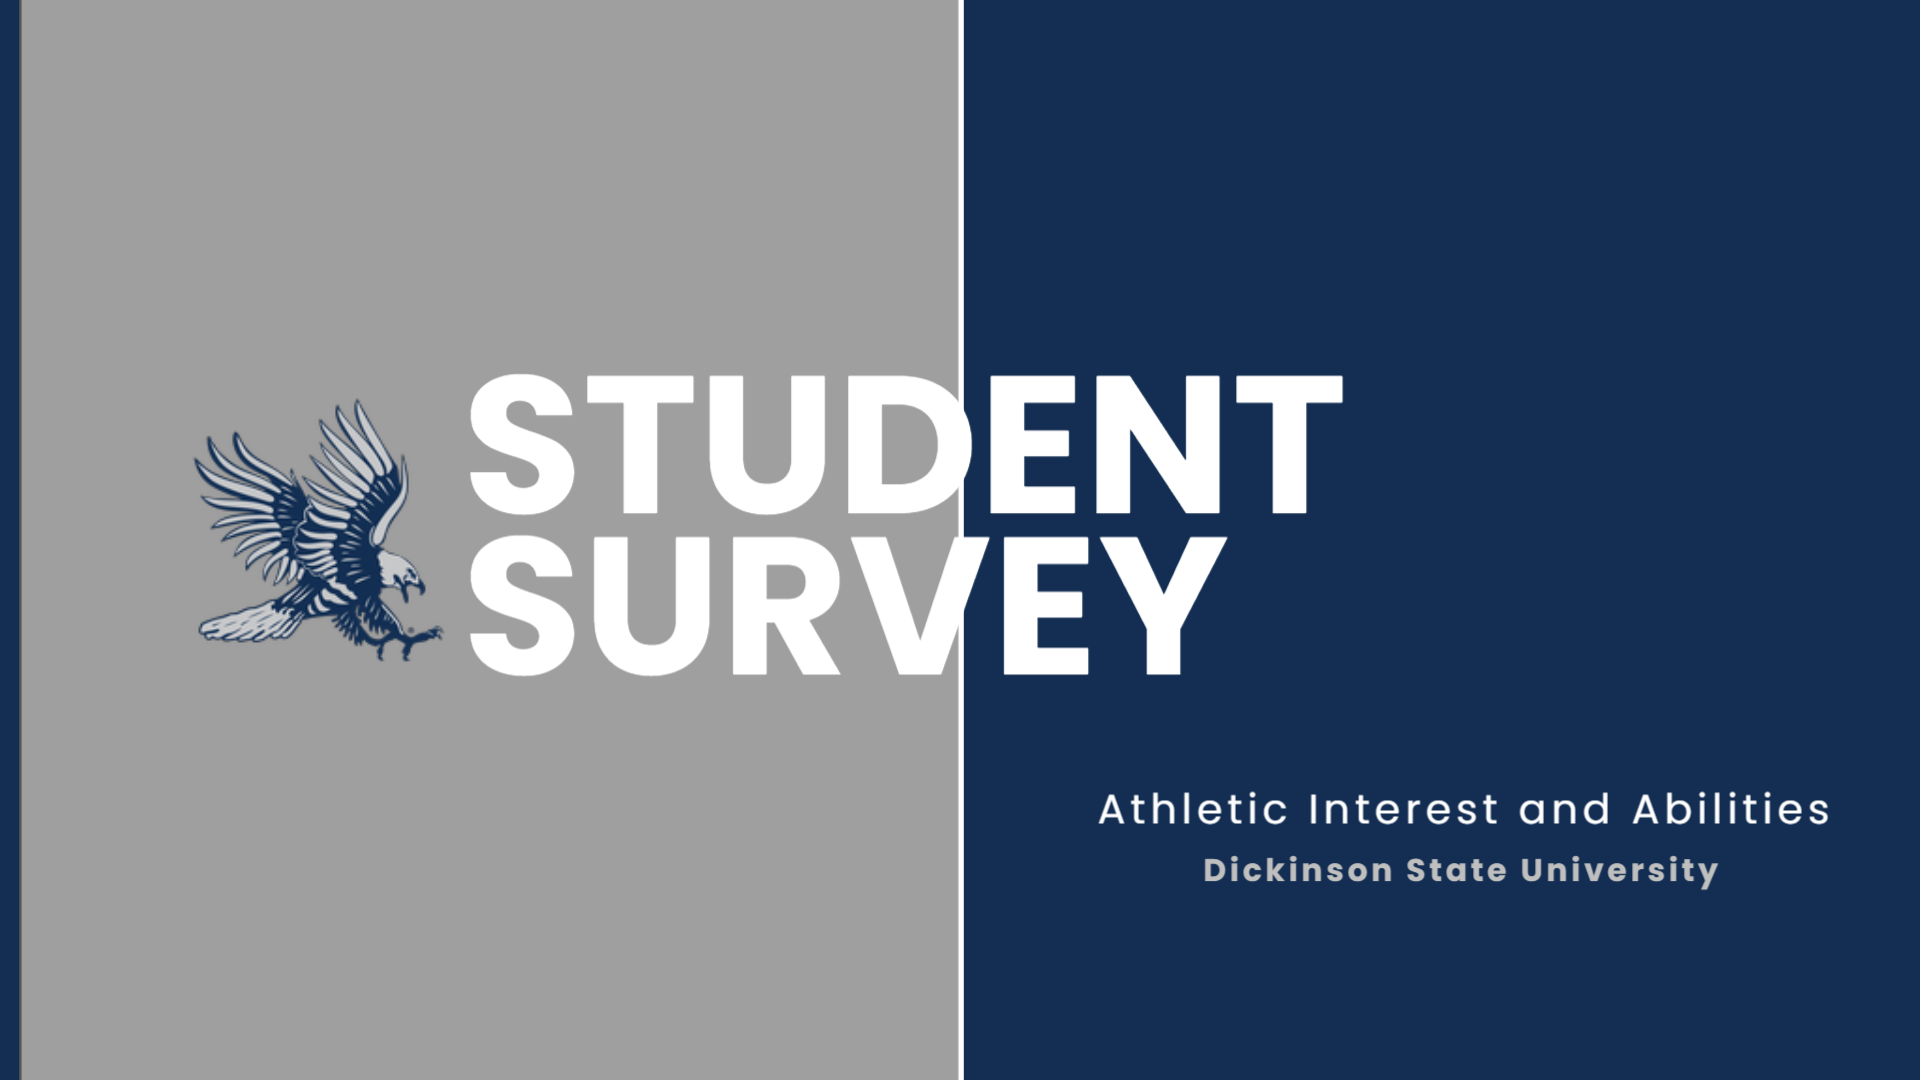 Student Athletic Interest and Abilities Survey now open!